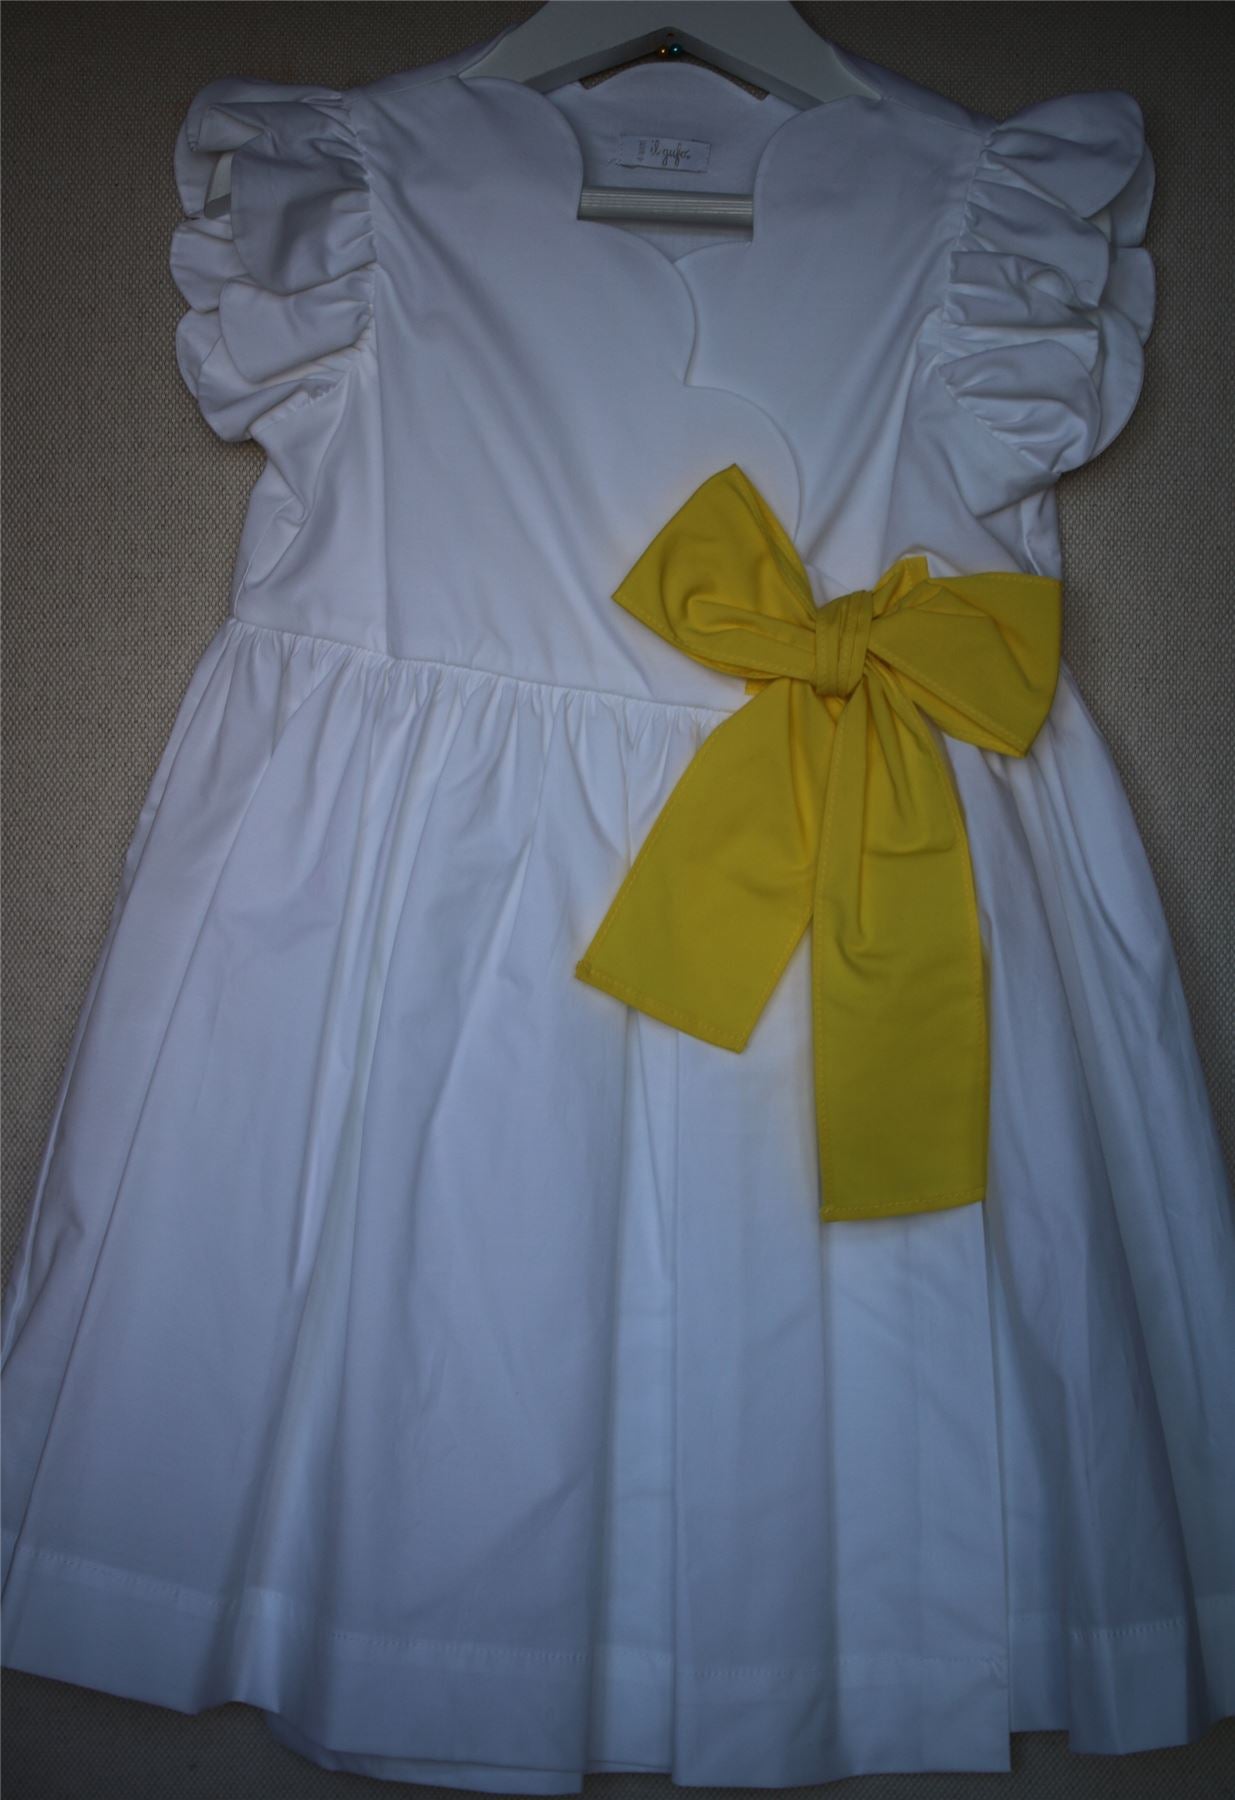 IL GUFO GIRLS WHITE COTTON DRESS WITH YELLOW BOW 4 YEARS